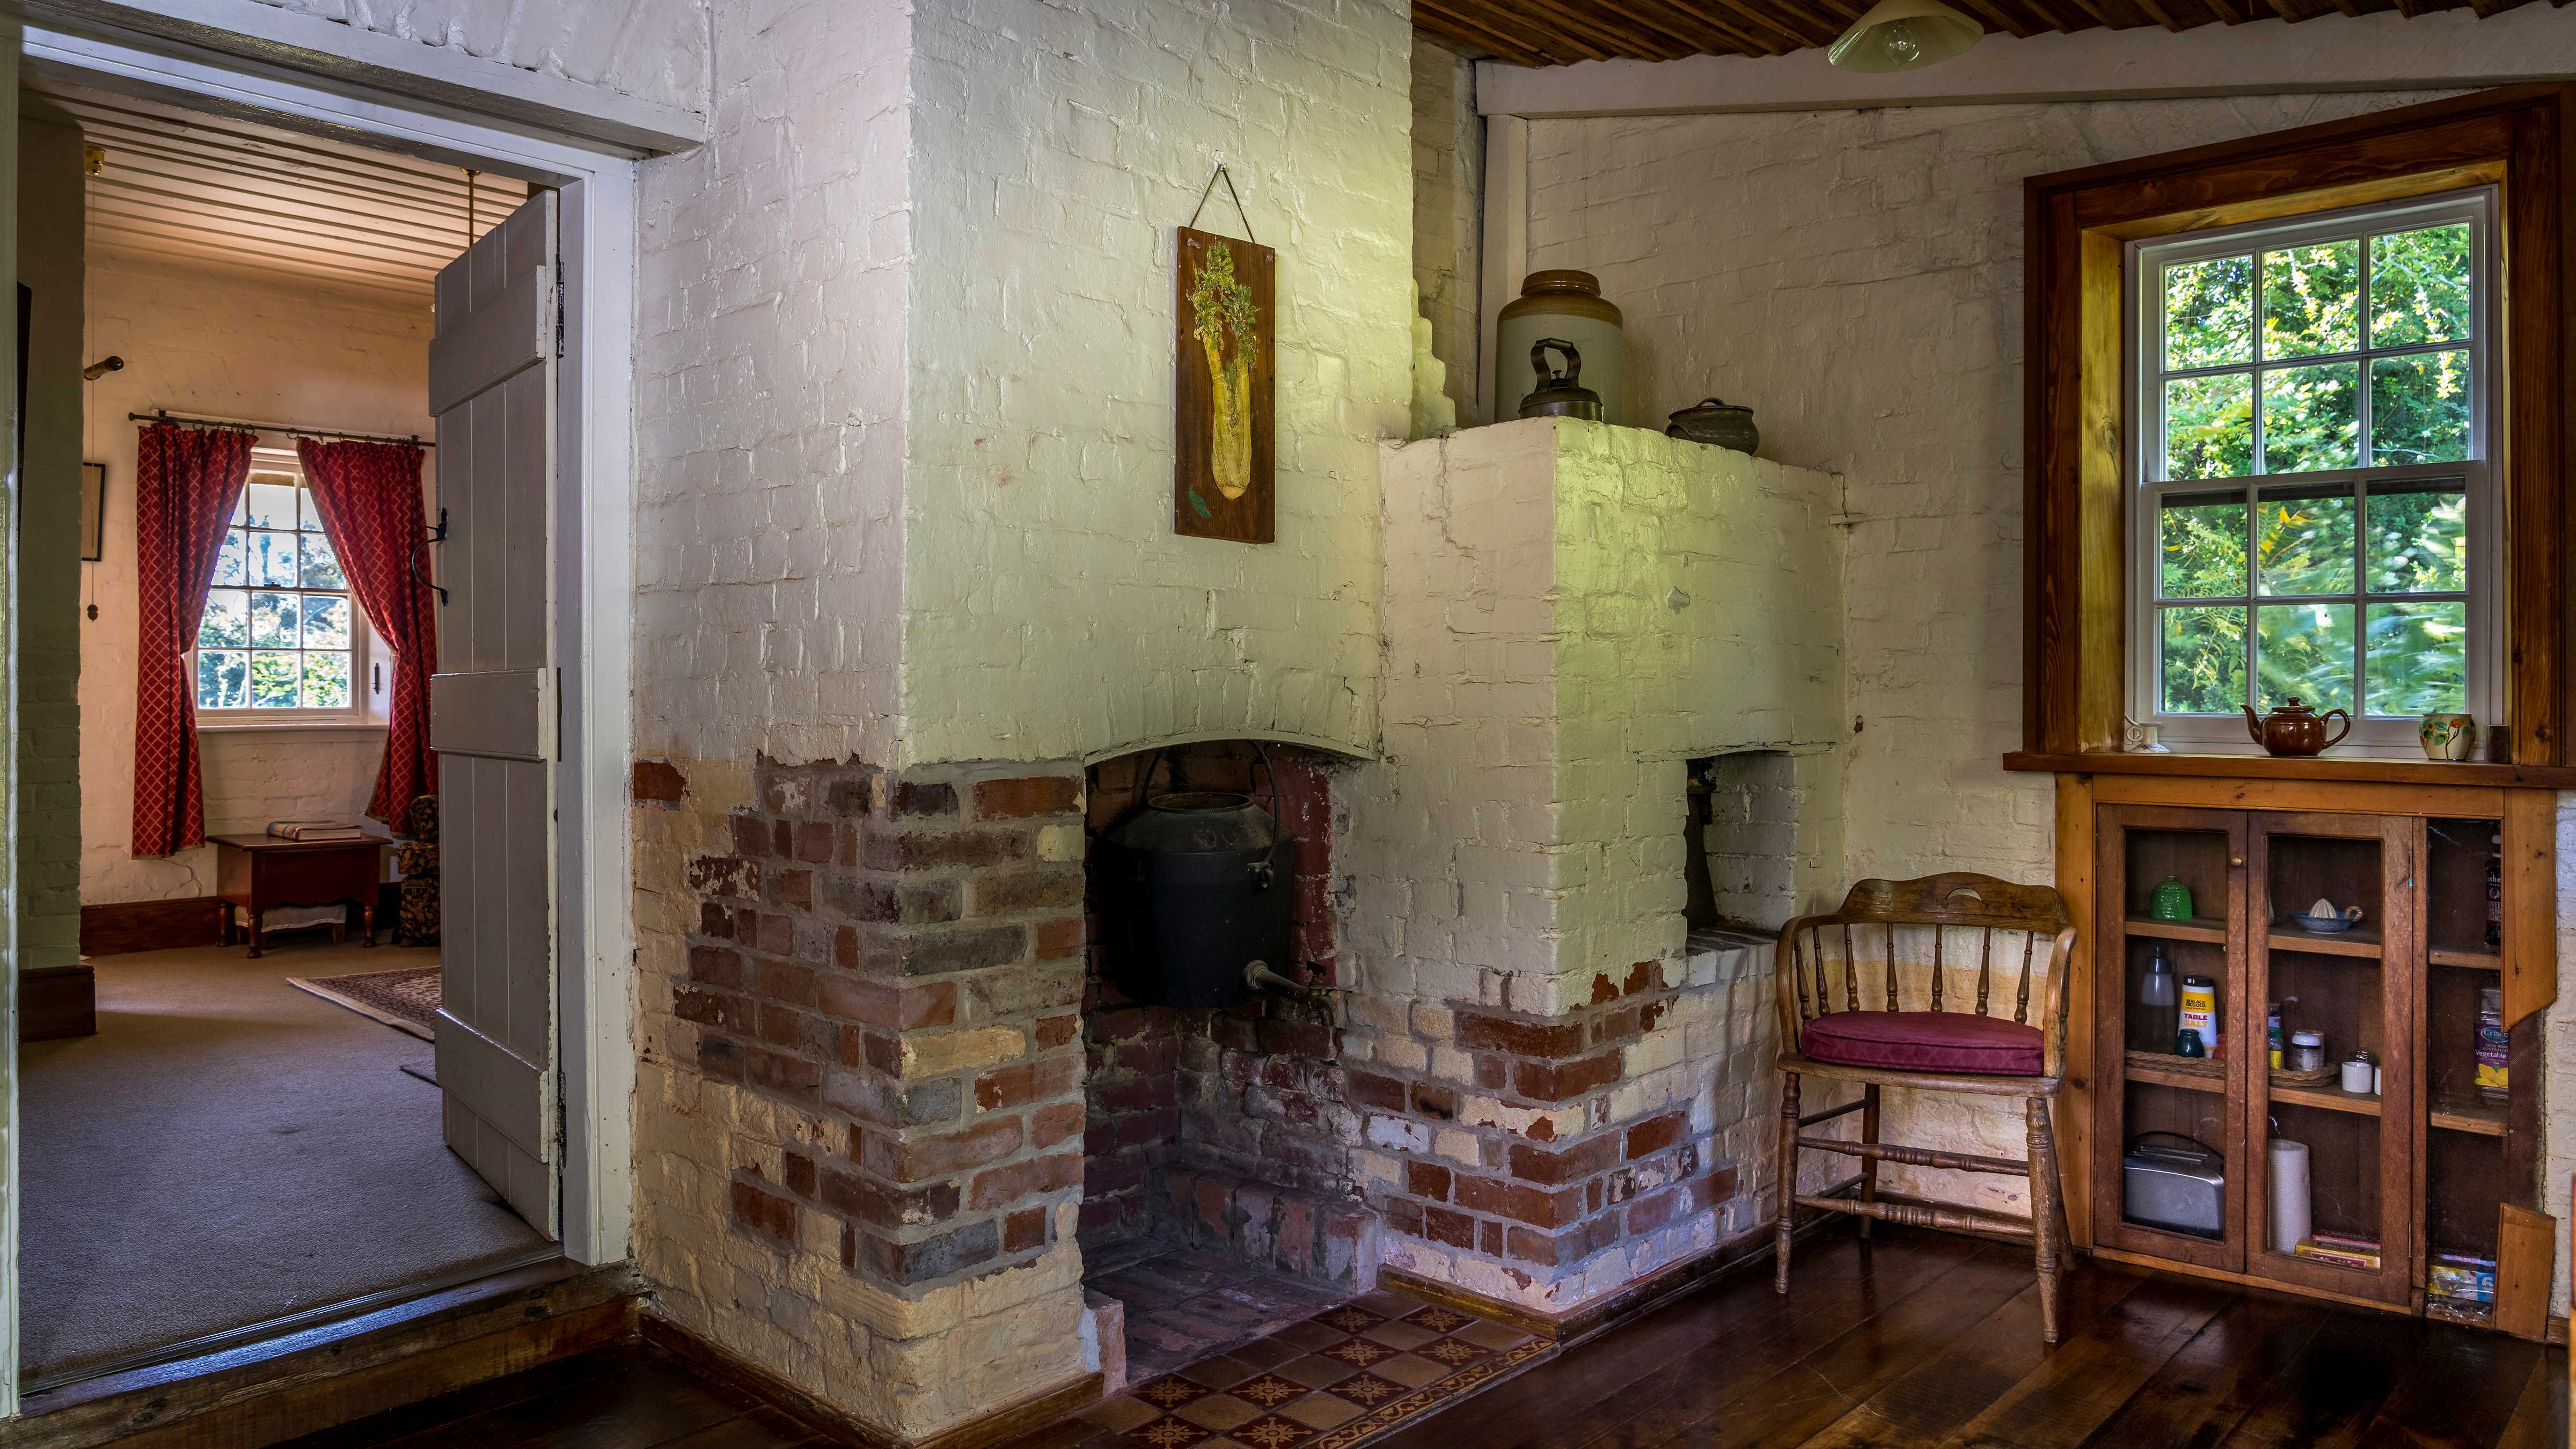 A timber surrounded paned window has a safe style cupboard below with condiments. A wooden captain’s chair with a maroon cushion is to the side. Brick walls painted white and unpainted have a fireplace and a bread oven with several kitchen items sitting on top. A picture of a bunch of celery hangs on the wall. On the left of the image is a doorway leading to the sitting room which has brown carpet and a window with red curtains pulled open. Photo: Rob Burnett.